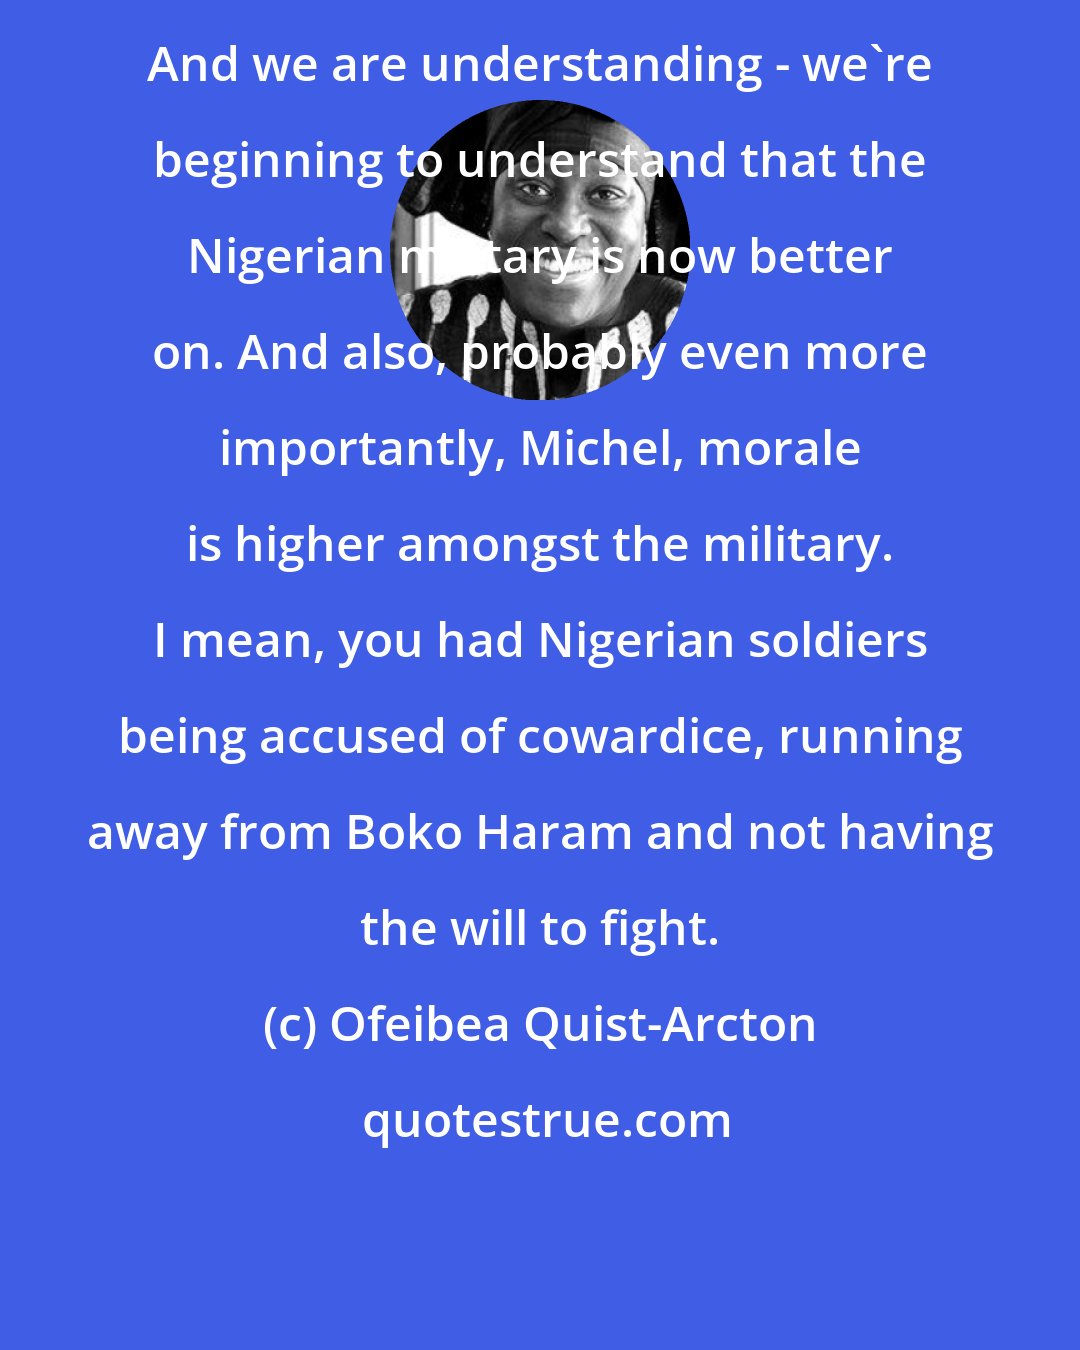 Ofeibea Quist-Arcton: And we are understanding - we're beginning to understand that the Nigerian military is now better on. And also, probably even more importantly, Michel, morale is higher amongst the military. I mean, you had Nigerian soldiers being accused of cowardice, running away from Boko Haram and not having the will to fight.